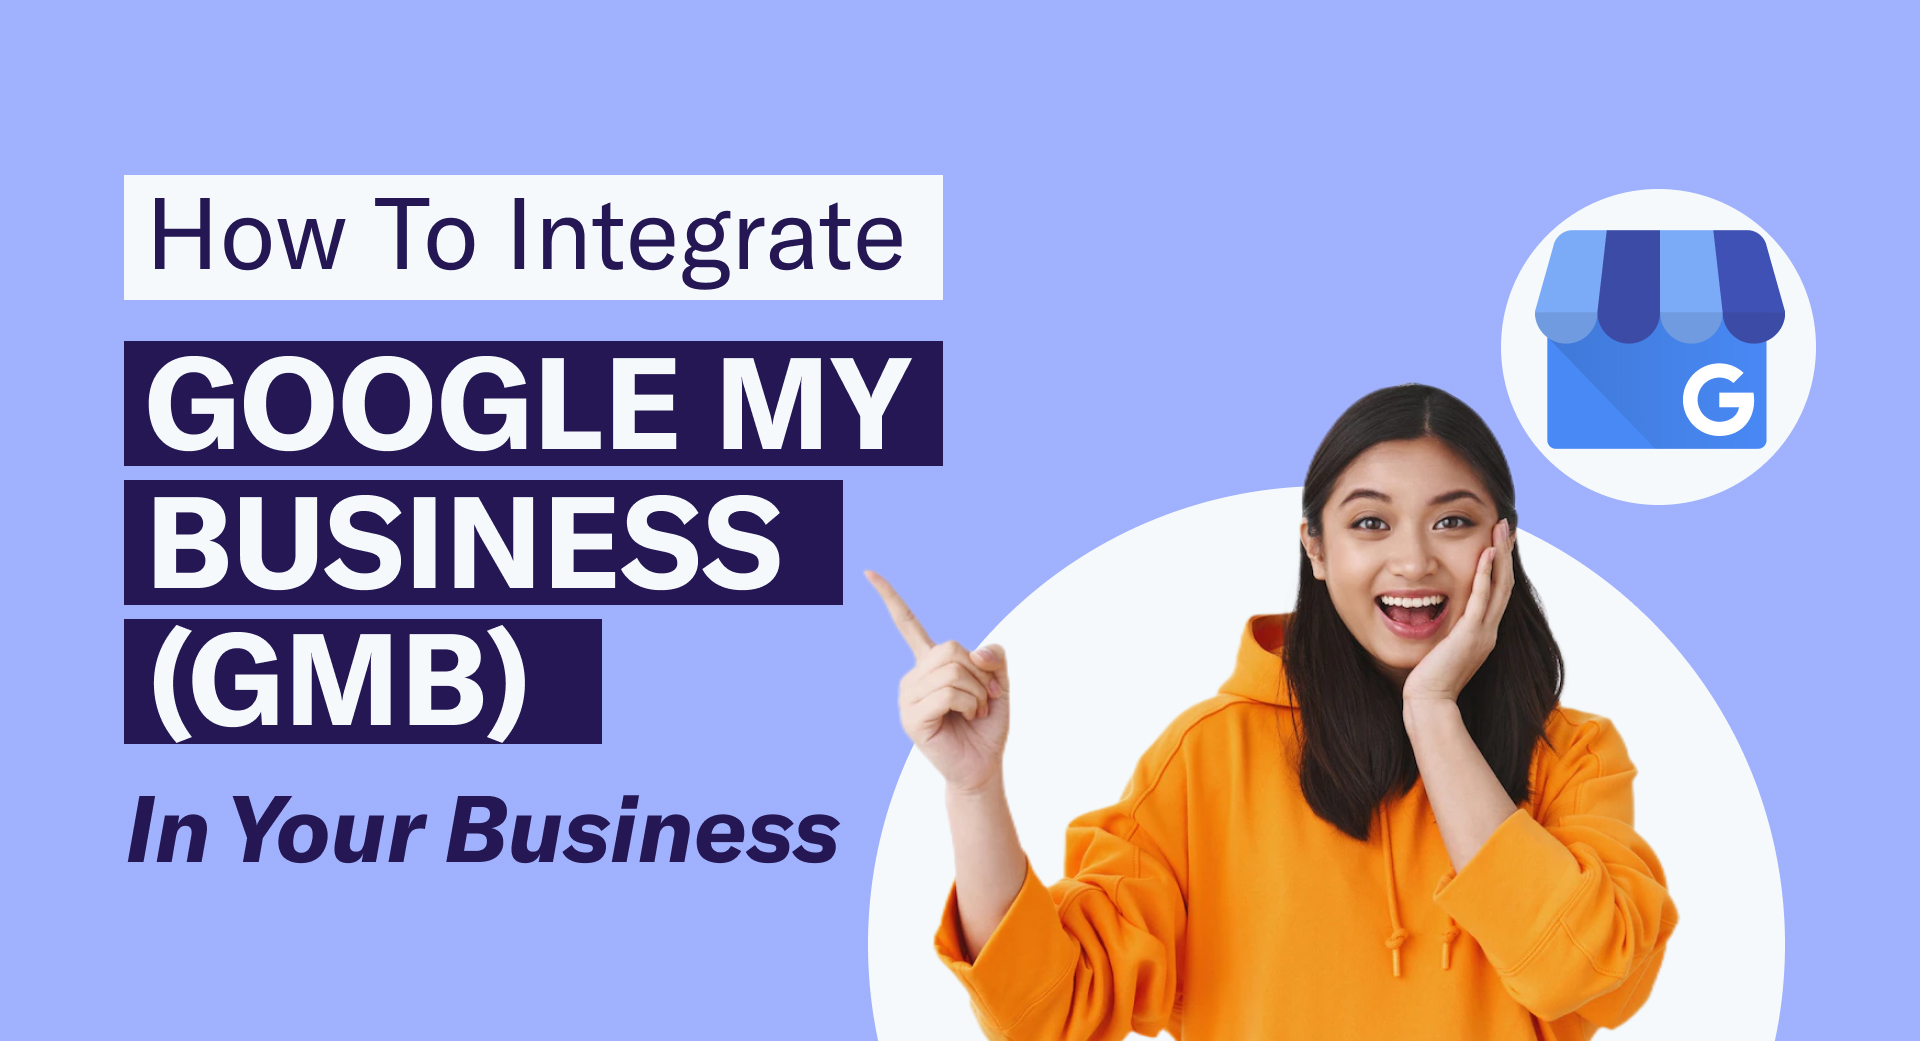 How To Integrate Google My Business (GMB) Into Your Business